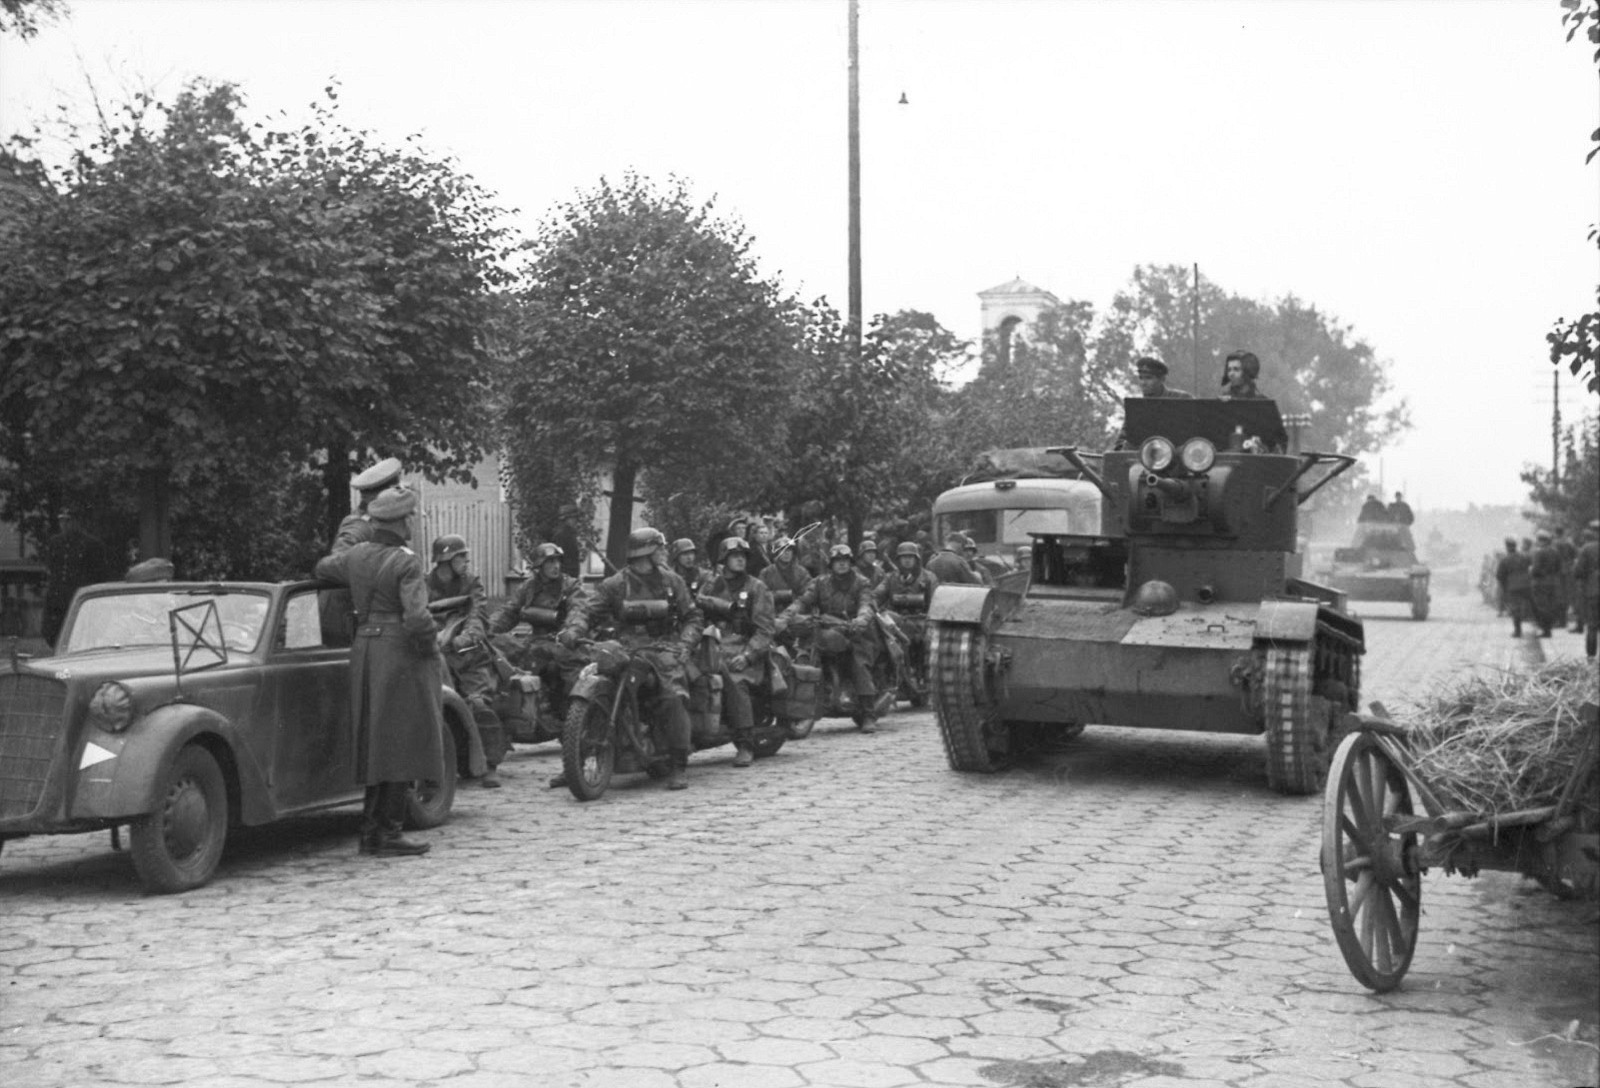 T-26 tanks of the Soviet 29th Tank Brigade enter Brest. On the left - German motorcyclists and Wehrmacht officers next to Opel Olympia car, Sept. 22, 1939 (bundesarchiv)